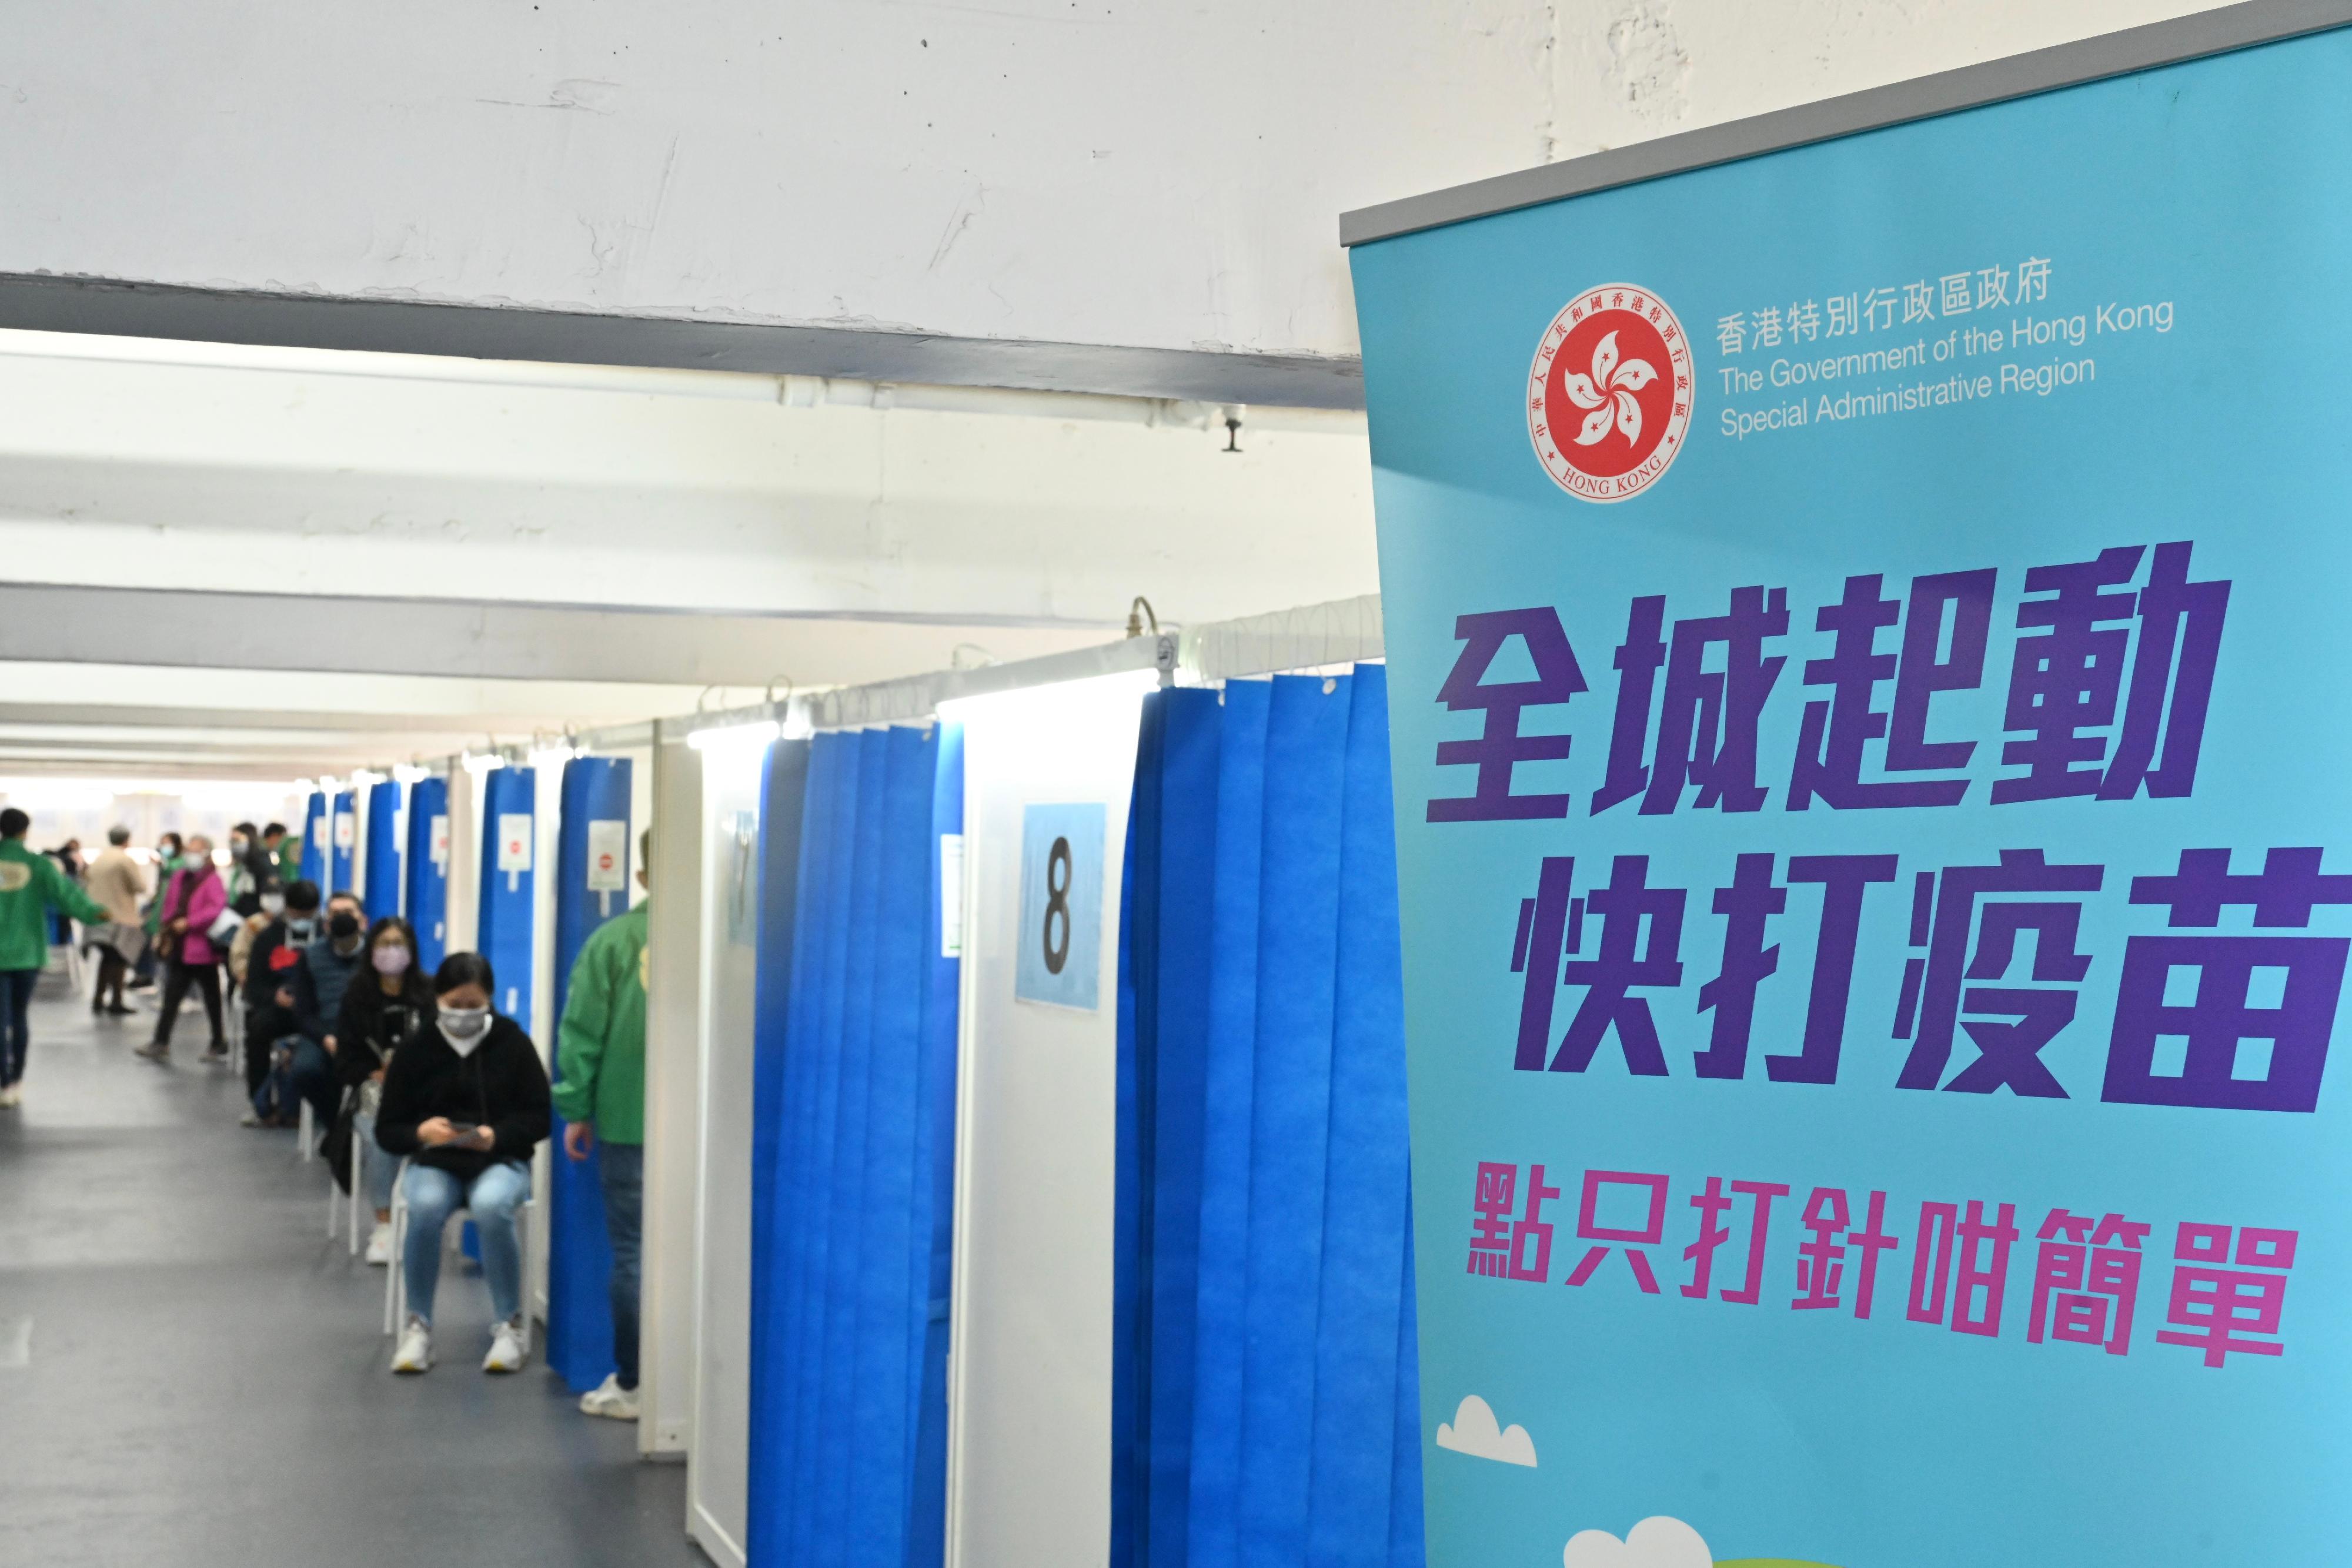 The Satellite Community Vaccination Centre in Leighton Centre in Causeway Bay came into operation today (February 11) to provide the BioNTech vaccination service to members of the public.